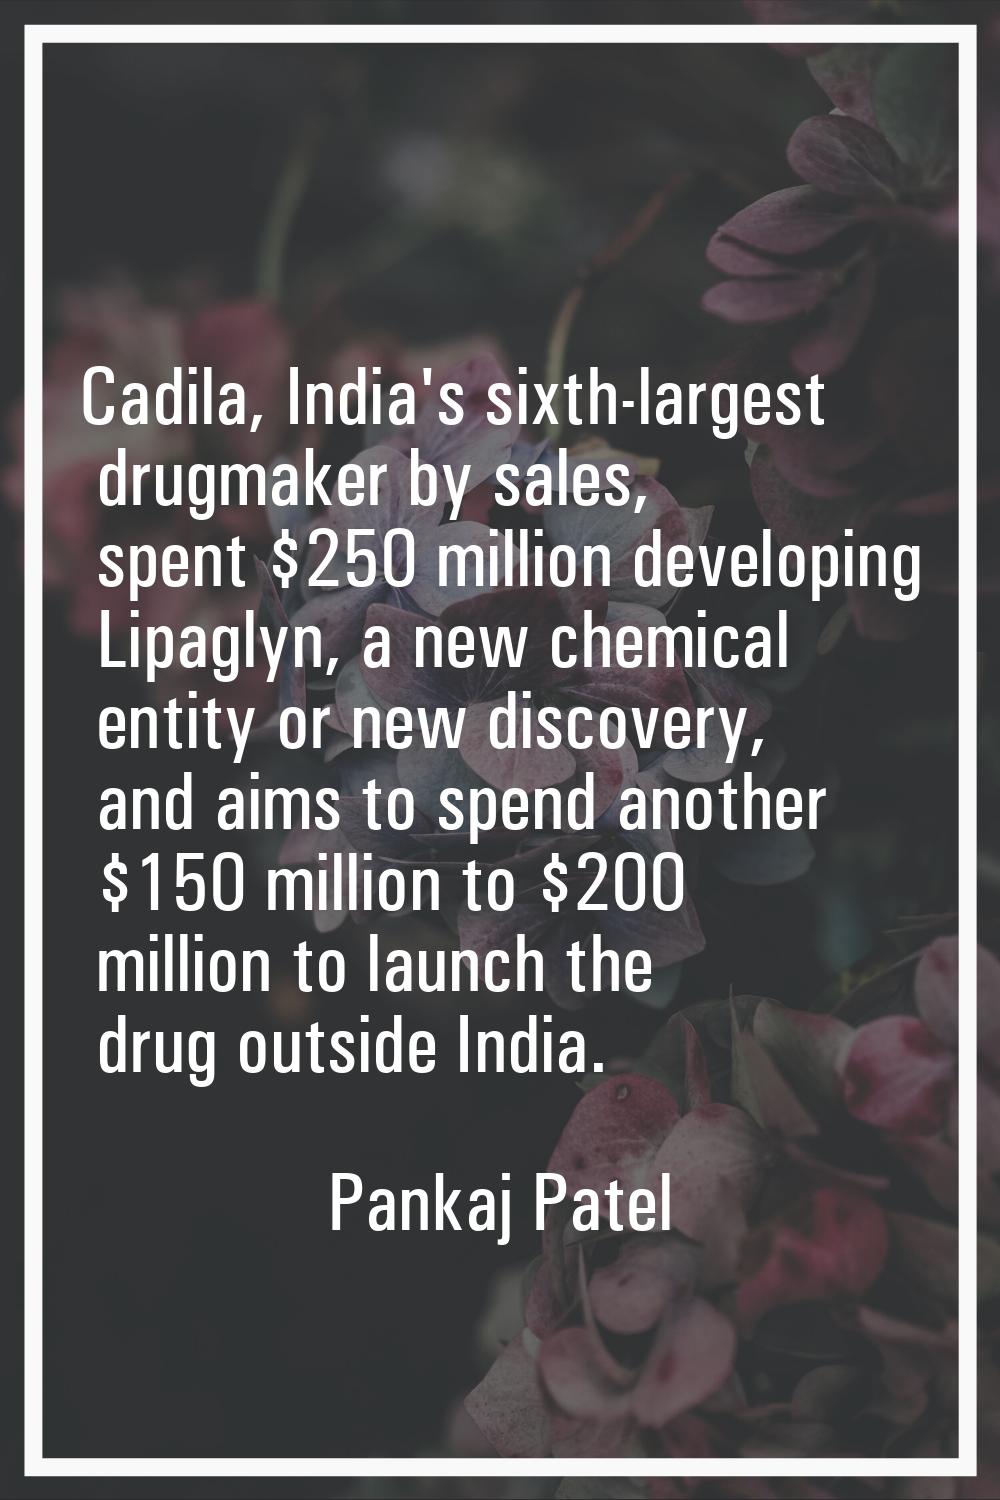 Cadila, India's sixth-largest drugmaker by sales, spent $250 million developing Lipaglyn, a new che